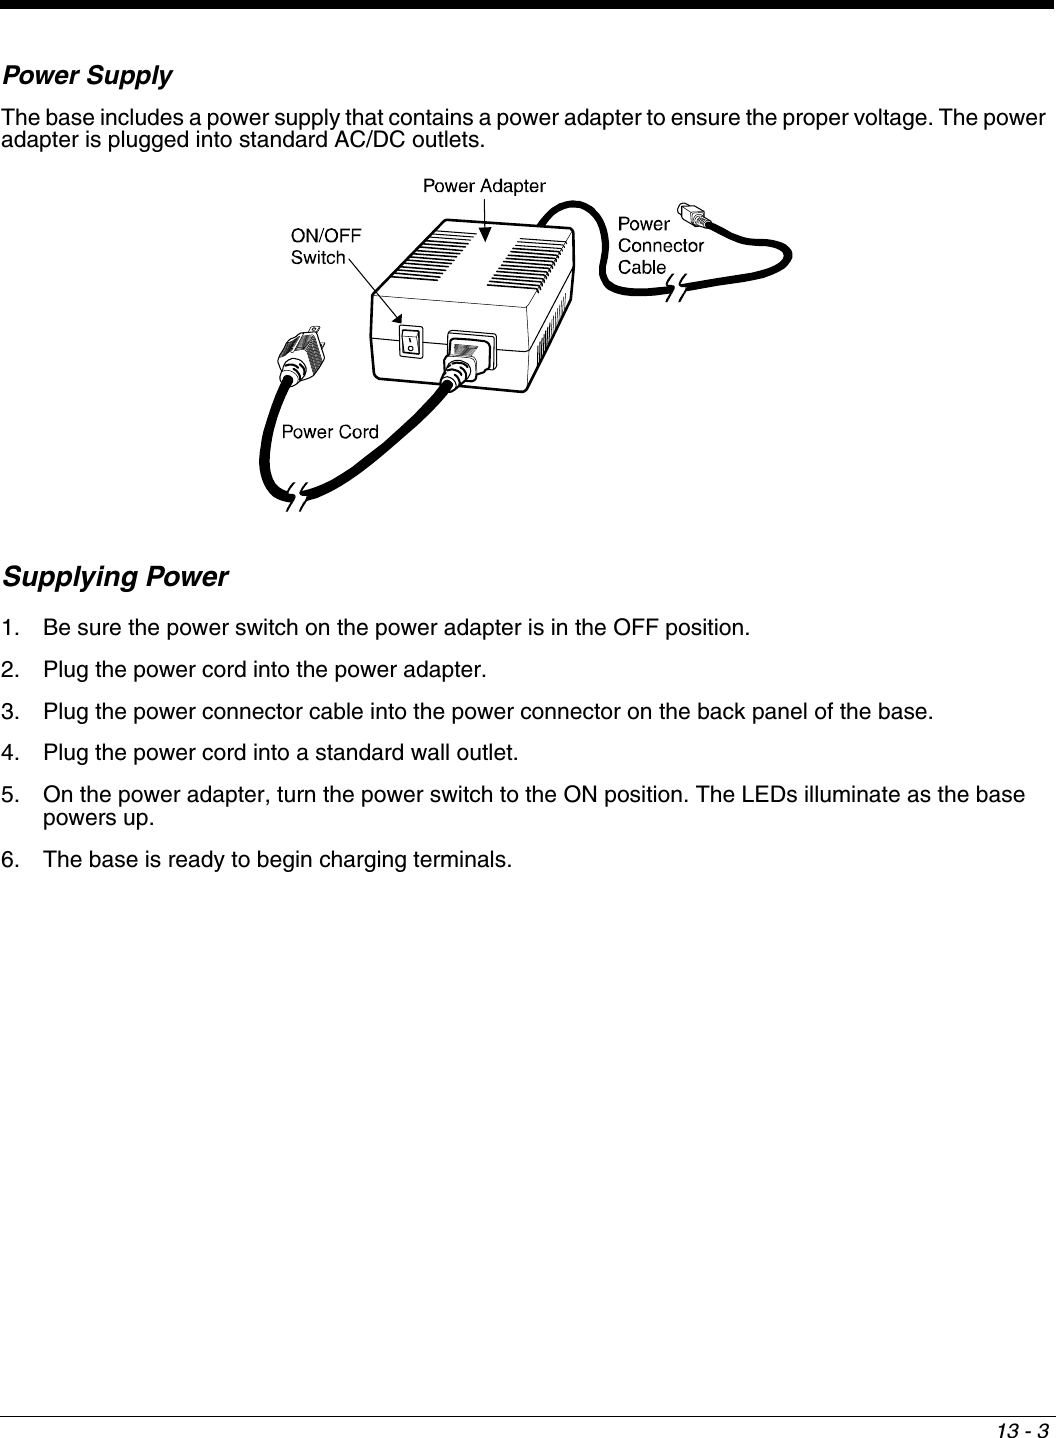 13 - 3Power SupplyThe base includes a power supply that contains a power adapter to ensure the proper voltage. The power adapter is plugged into standard AC/DC outlets.Supplying Power1. Be sure the power switch on the power adapter is in the OFF position. 2. Plug the power cord into the power adapter.3. Plug the power connector cable into the power connector on the back panel of the base.4. Plug the power cord into a standard wall outlet.5. On the power adapter, turn the power switch to the ON position. The LEDs illuminate as the base powers up.6. The base is ready to begin charging terminals.